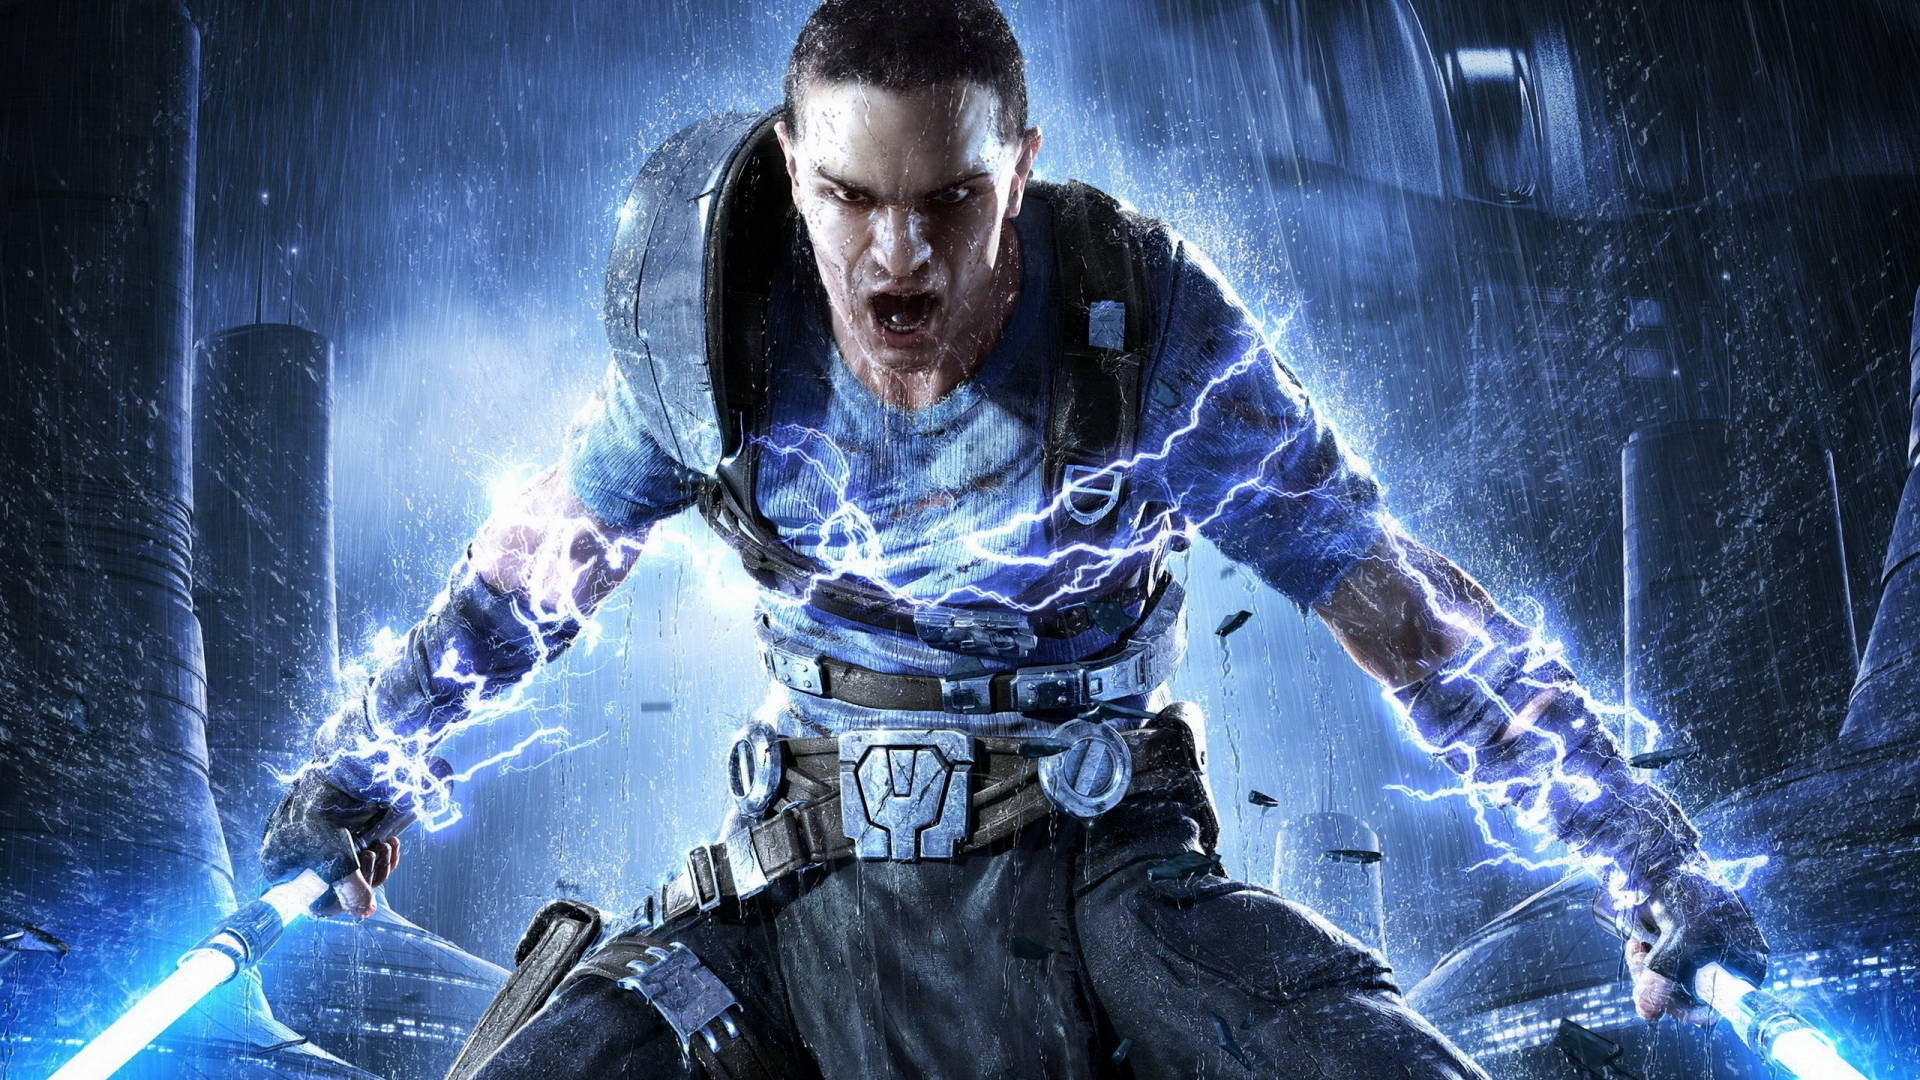 Star Wars Force Unleashed for 1920 x 1080 HDTV 1080p resolution